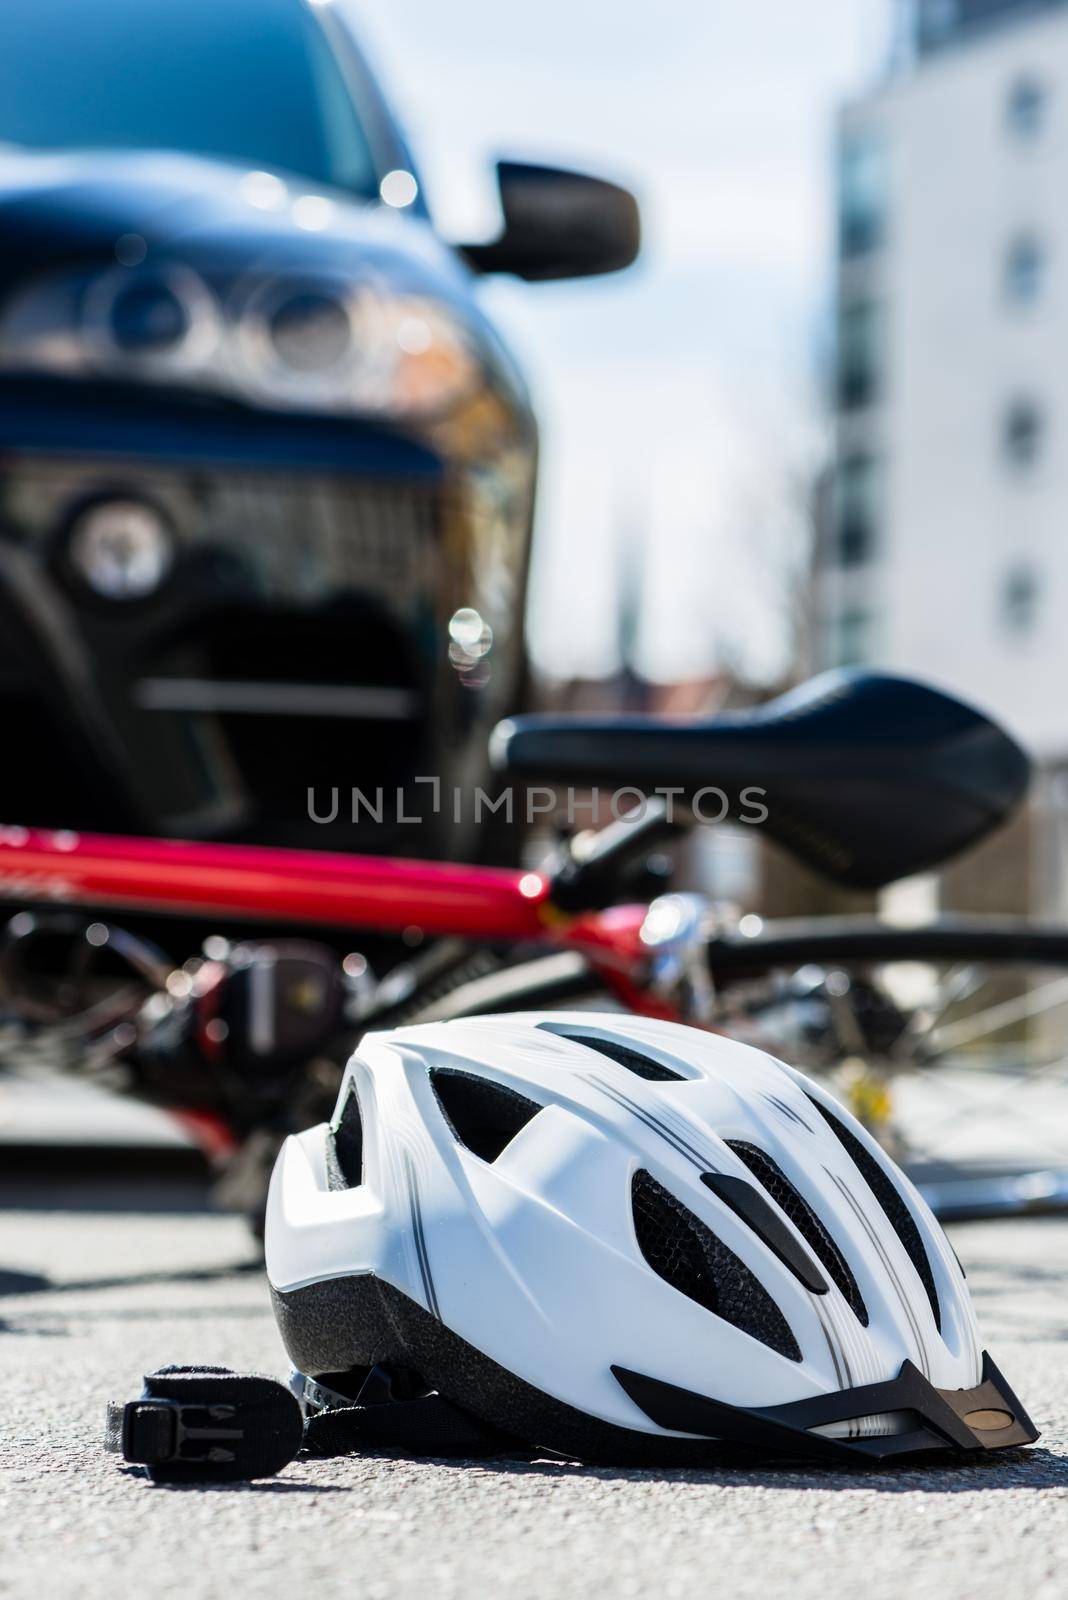 Close-up of a bicycling helmet on the asphalt after car accident by Kzenon